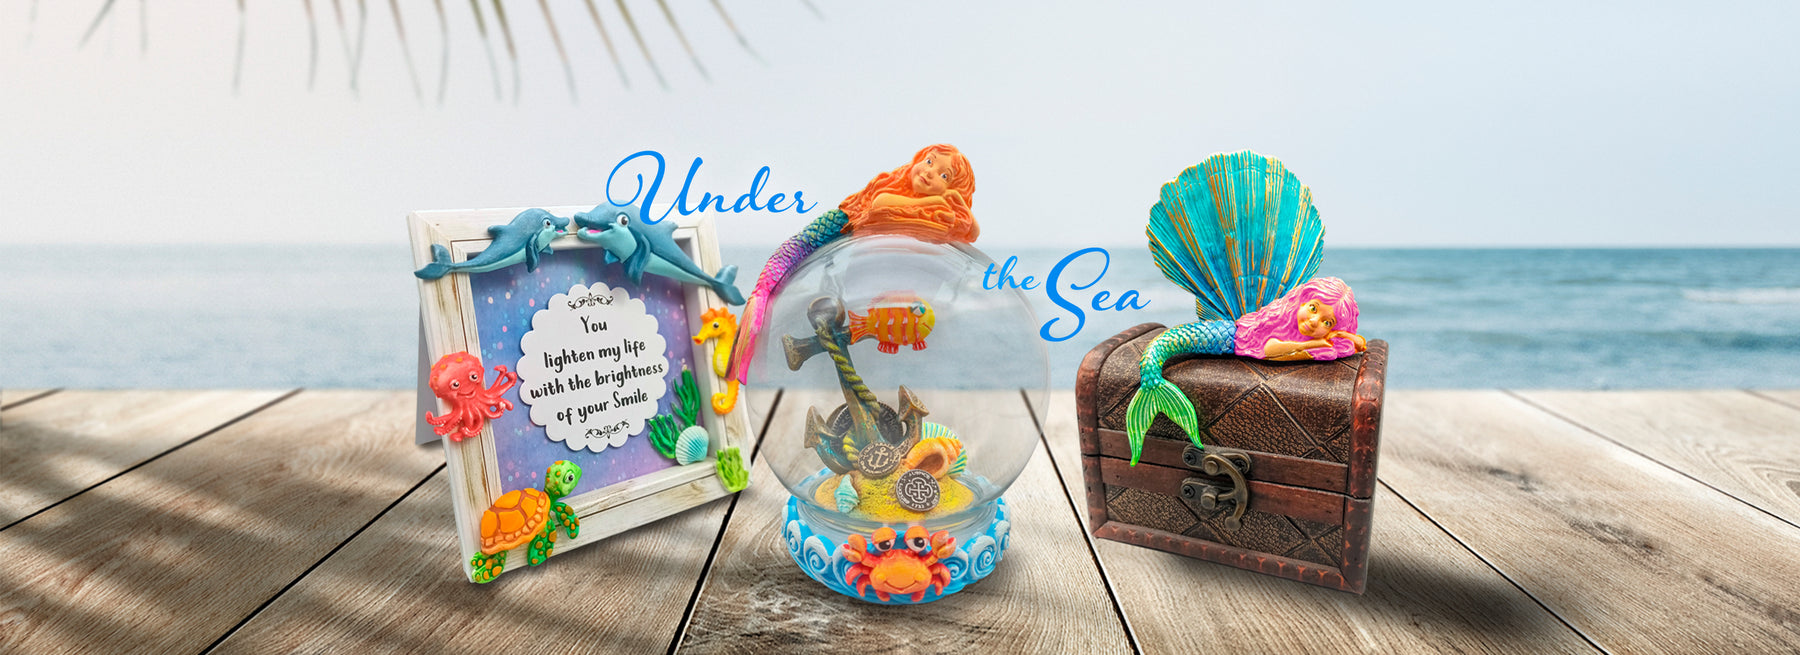 Under the Sea Crafts: Craft Show, Inspiration, and Techniques